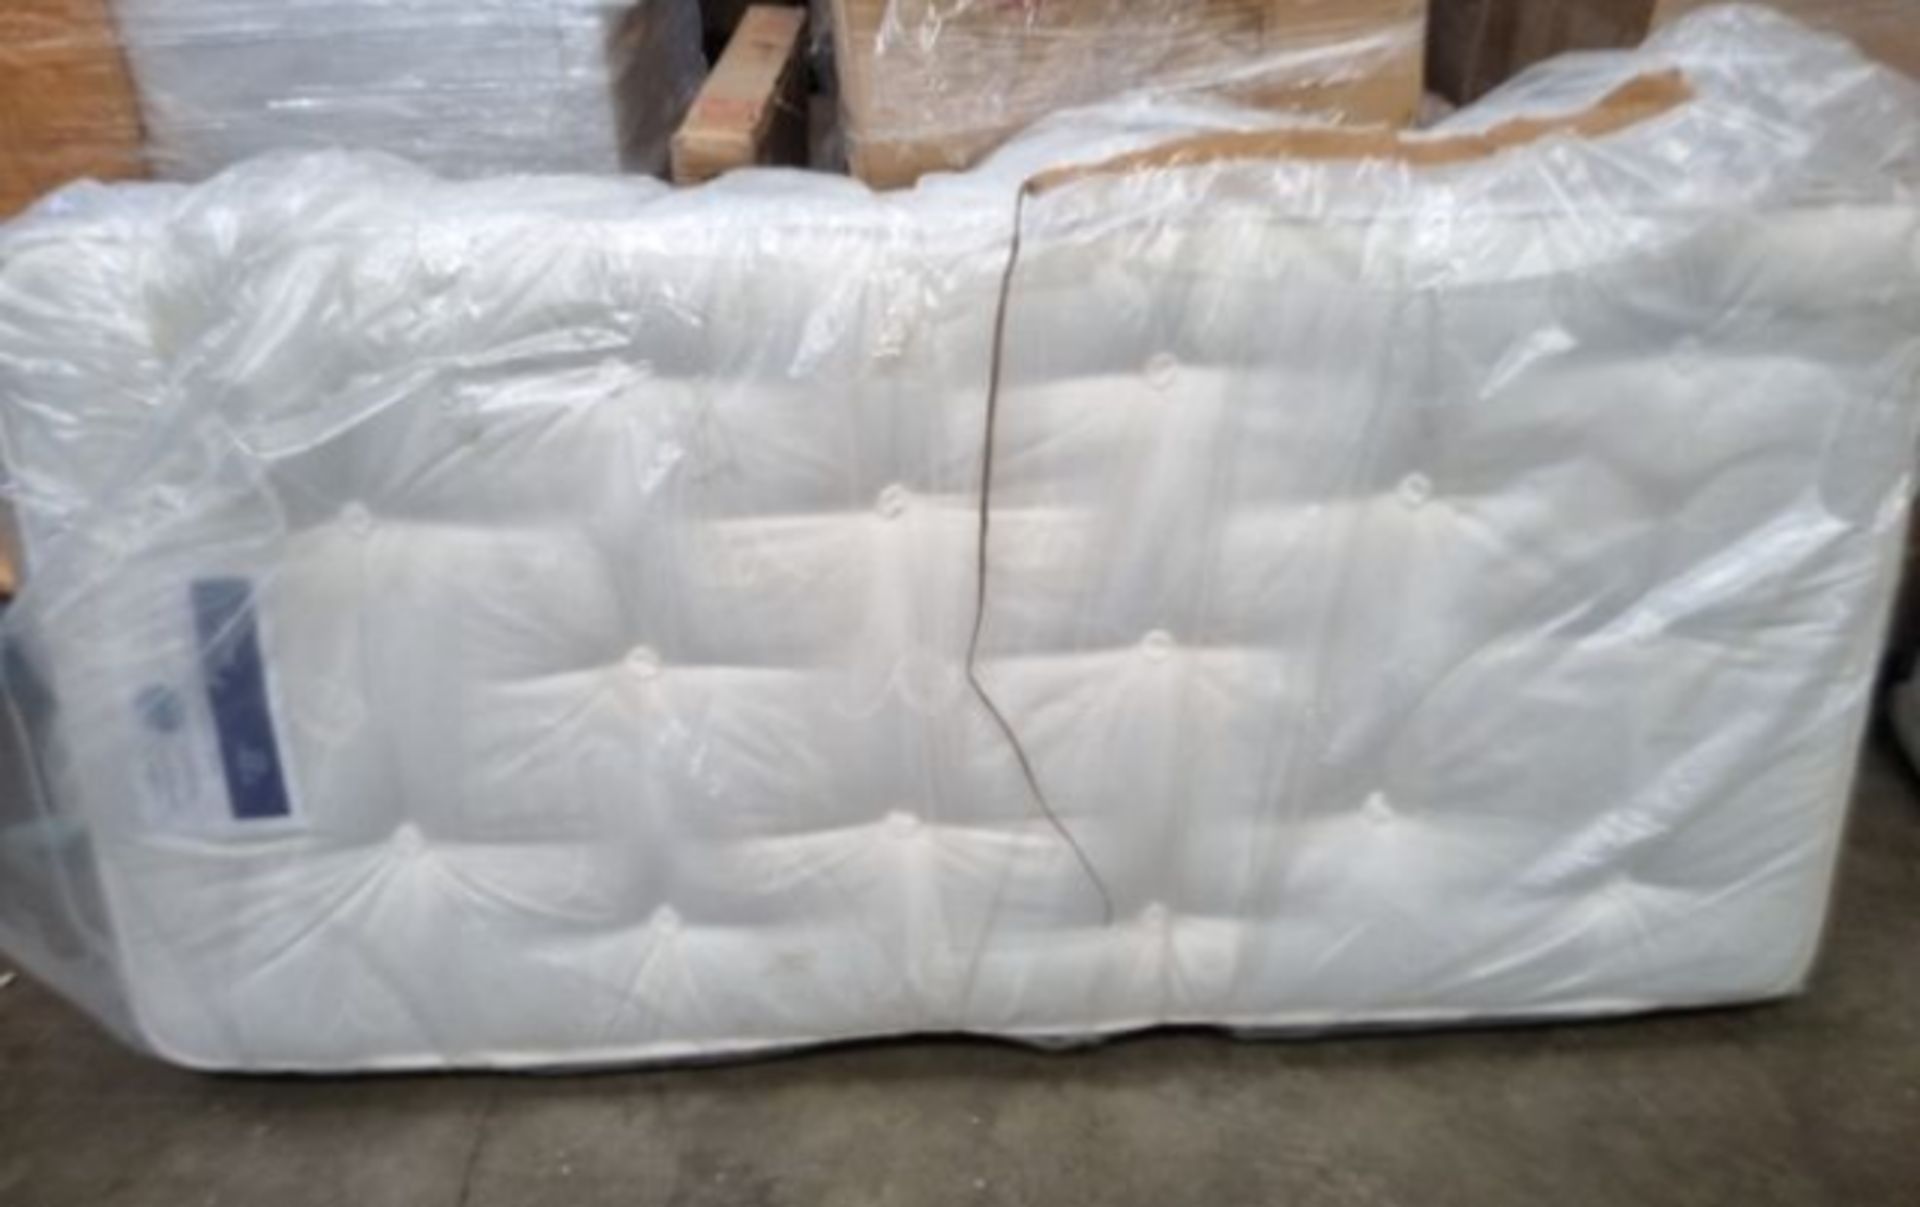 Grade A John Lewis & Partners thick single mattress in White